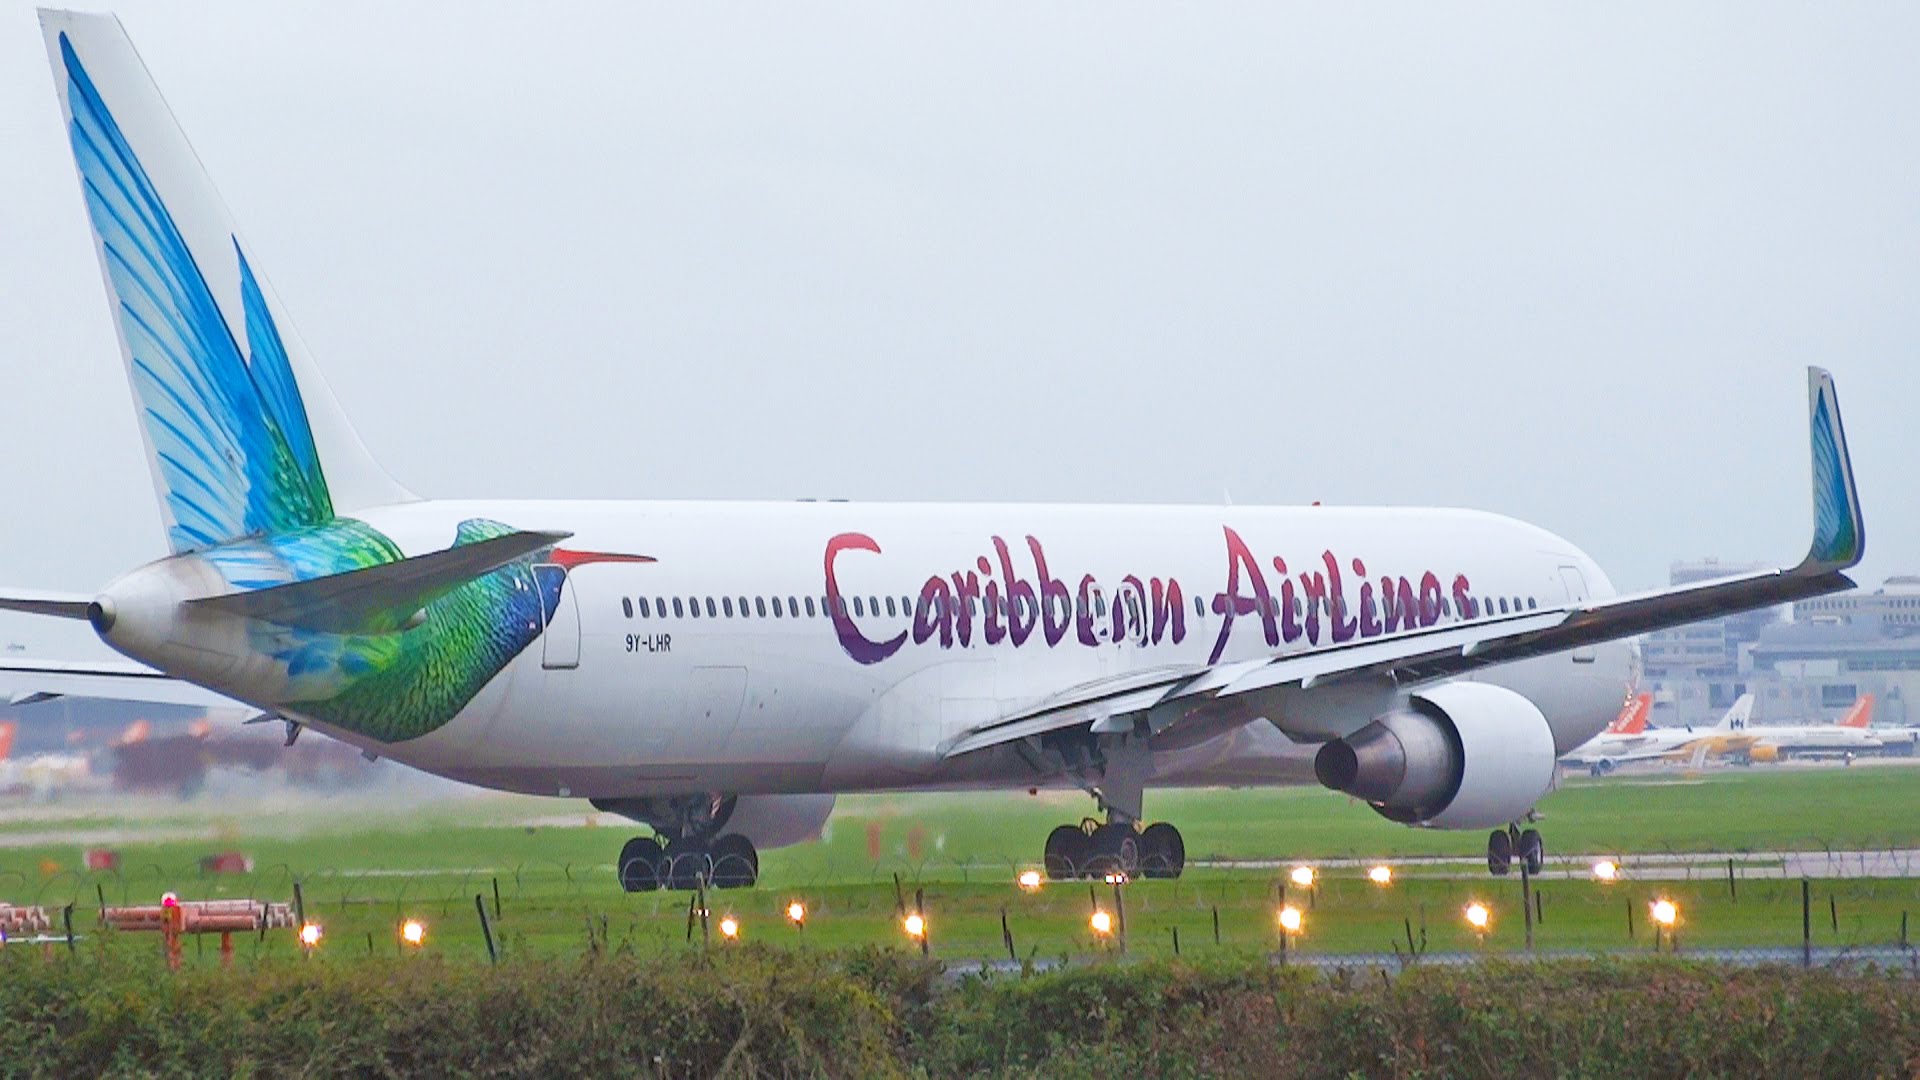 Caribbean Airlines announces travel waivers for tickets booked from